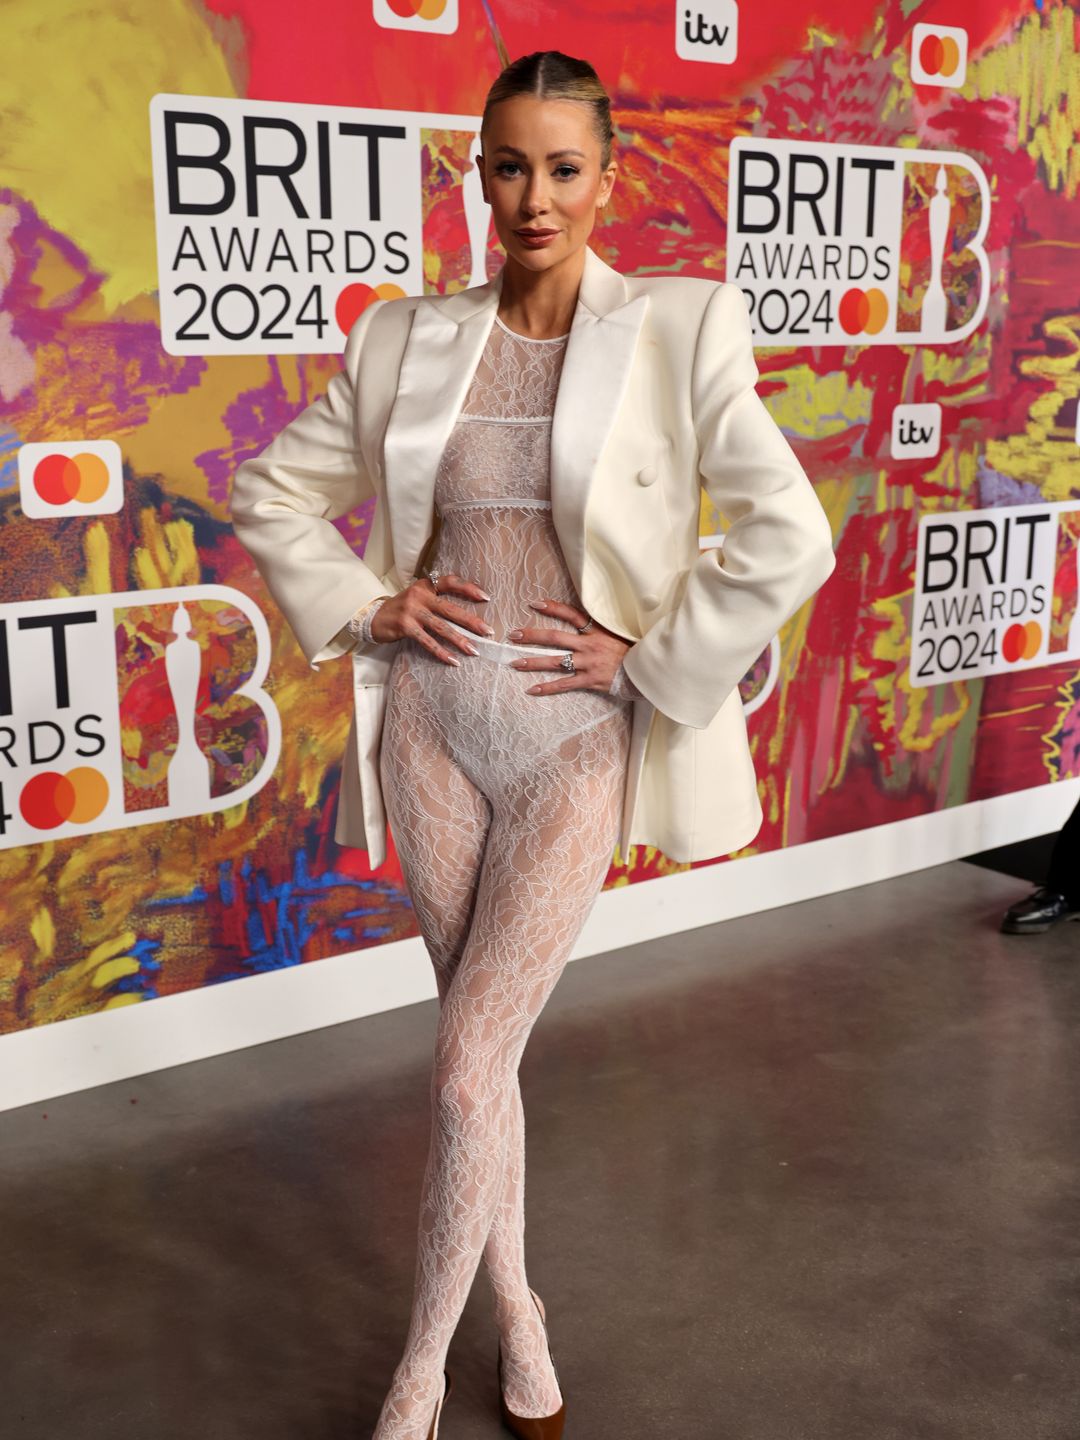 Olivia Attwood attends the BRIT Awards 2024